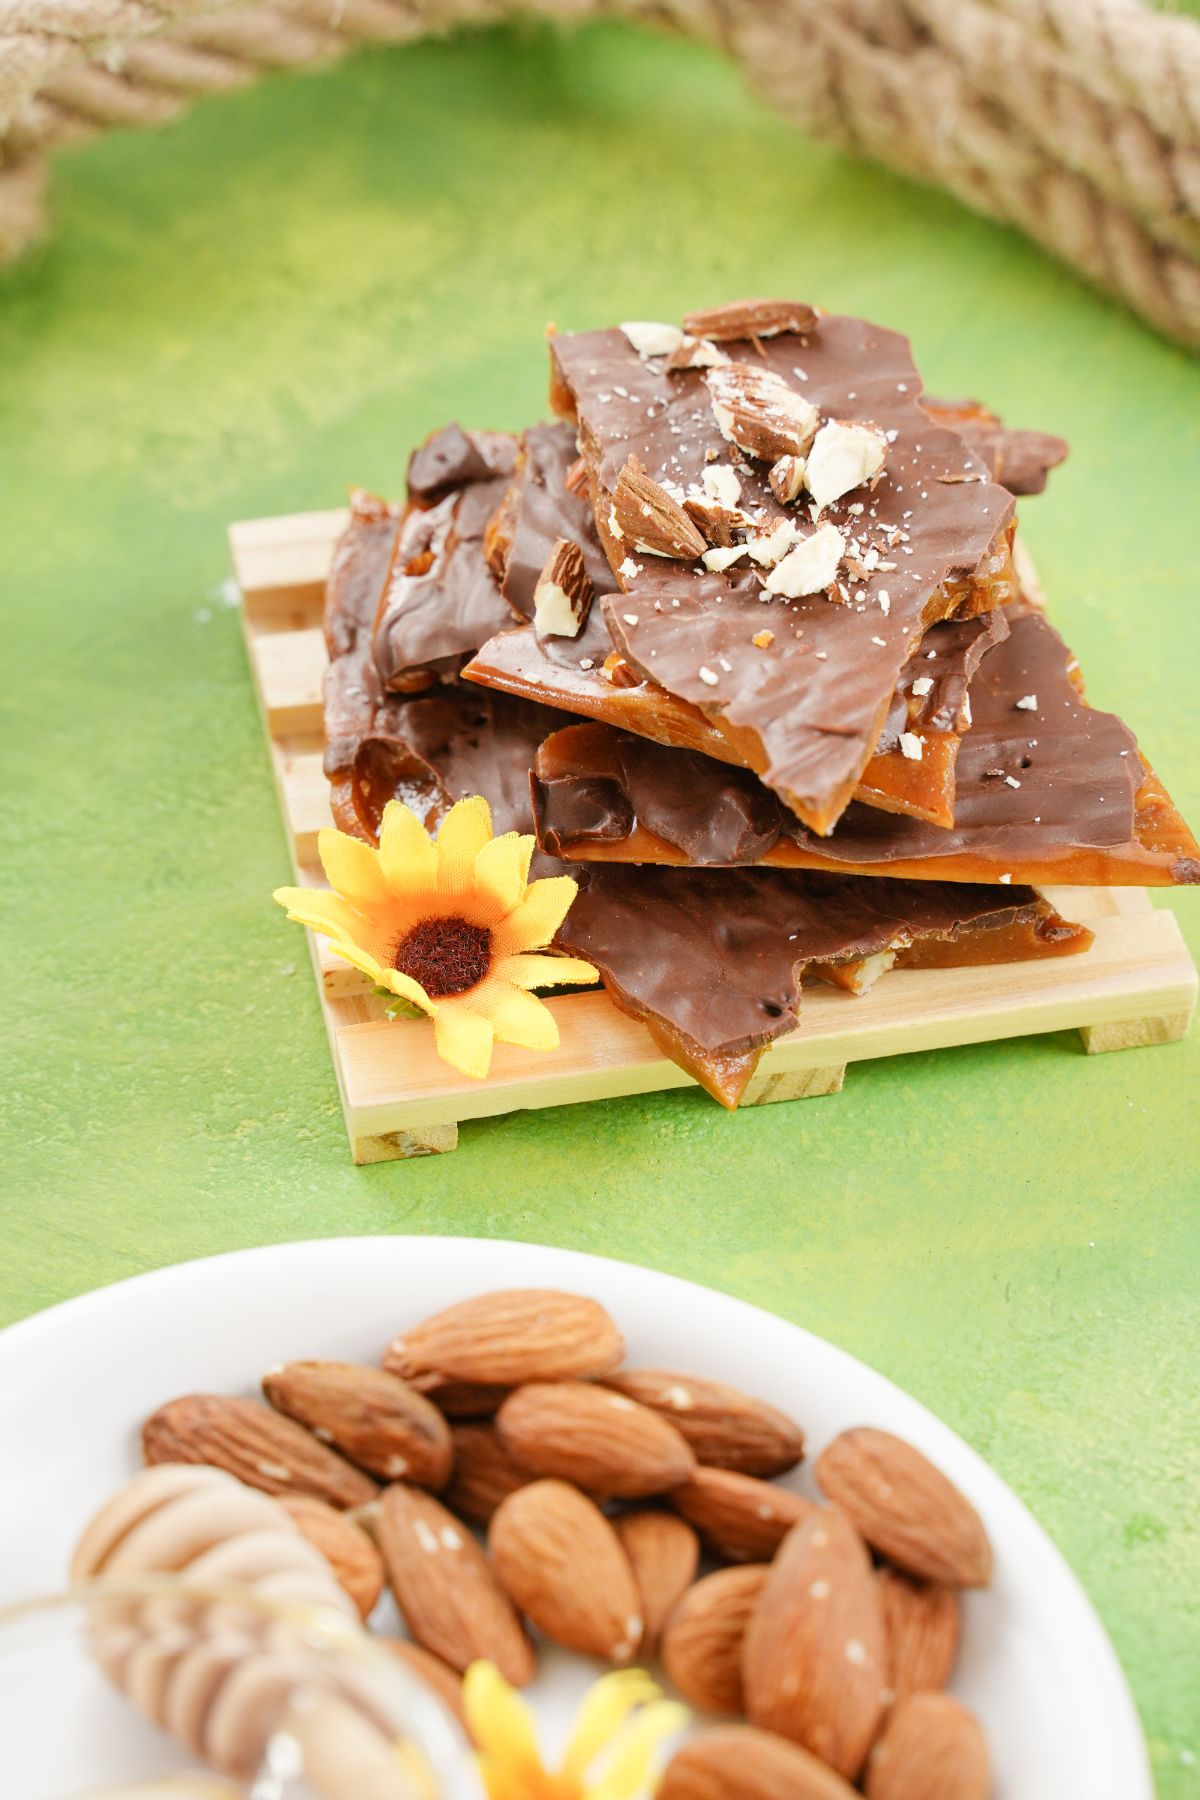 No-Bake English Toffee served on a wooden plater with sunflower